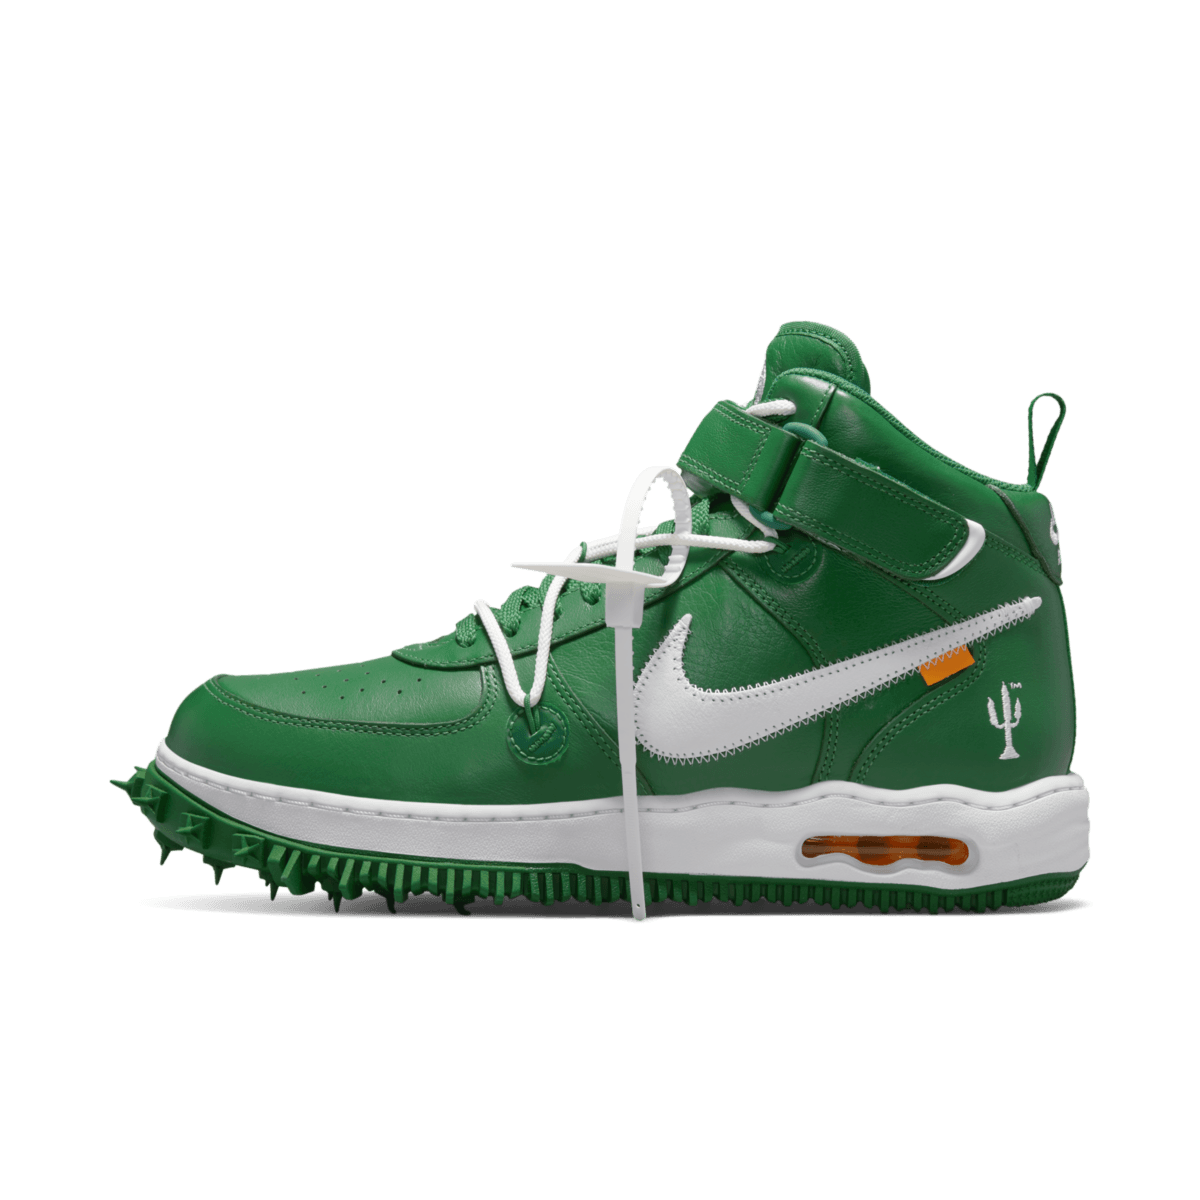 Off-White x Air Force 1 Mid "Pine Green"